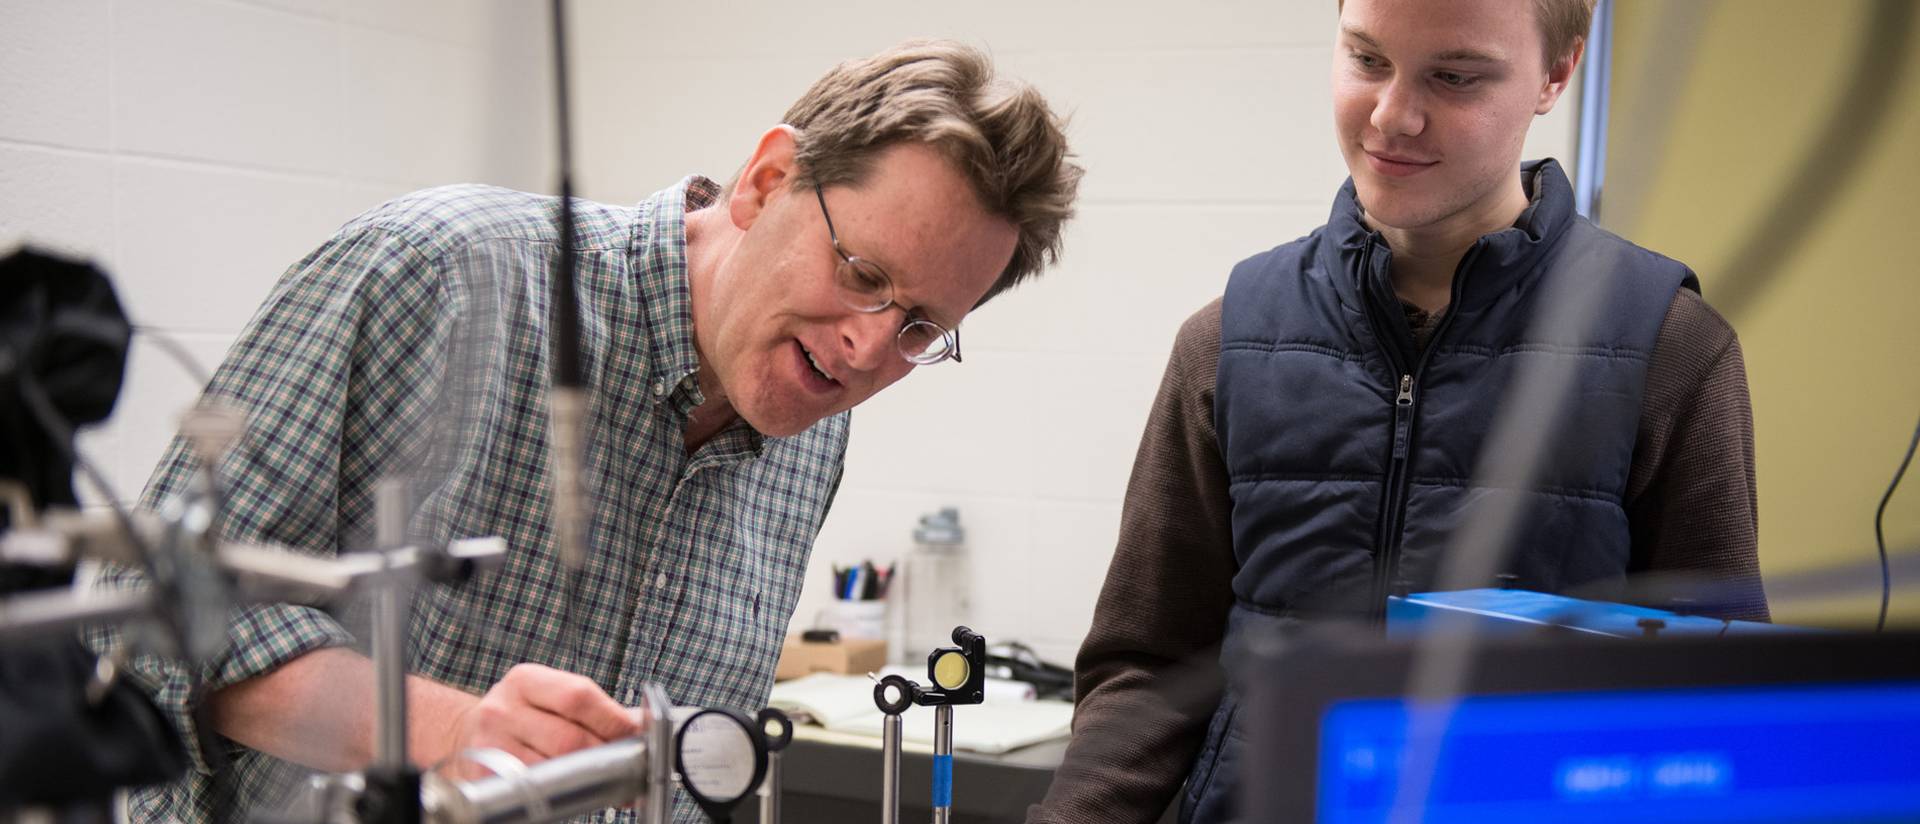 Dr. Stephen Drucker, UW-Eau Claire professor of chemistry, works on research related to photochemical reactions with student Michael McDonnell, Spring Valley.